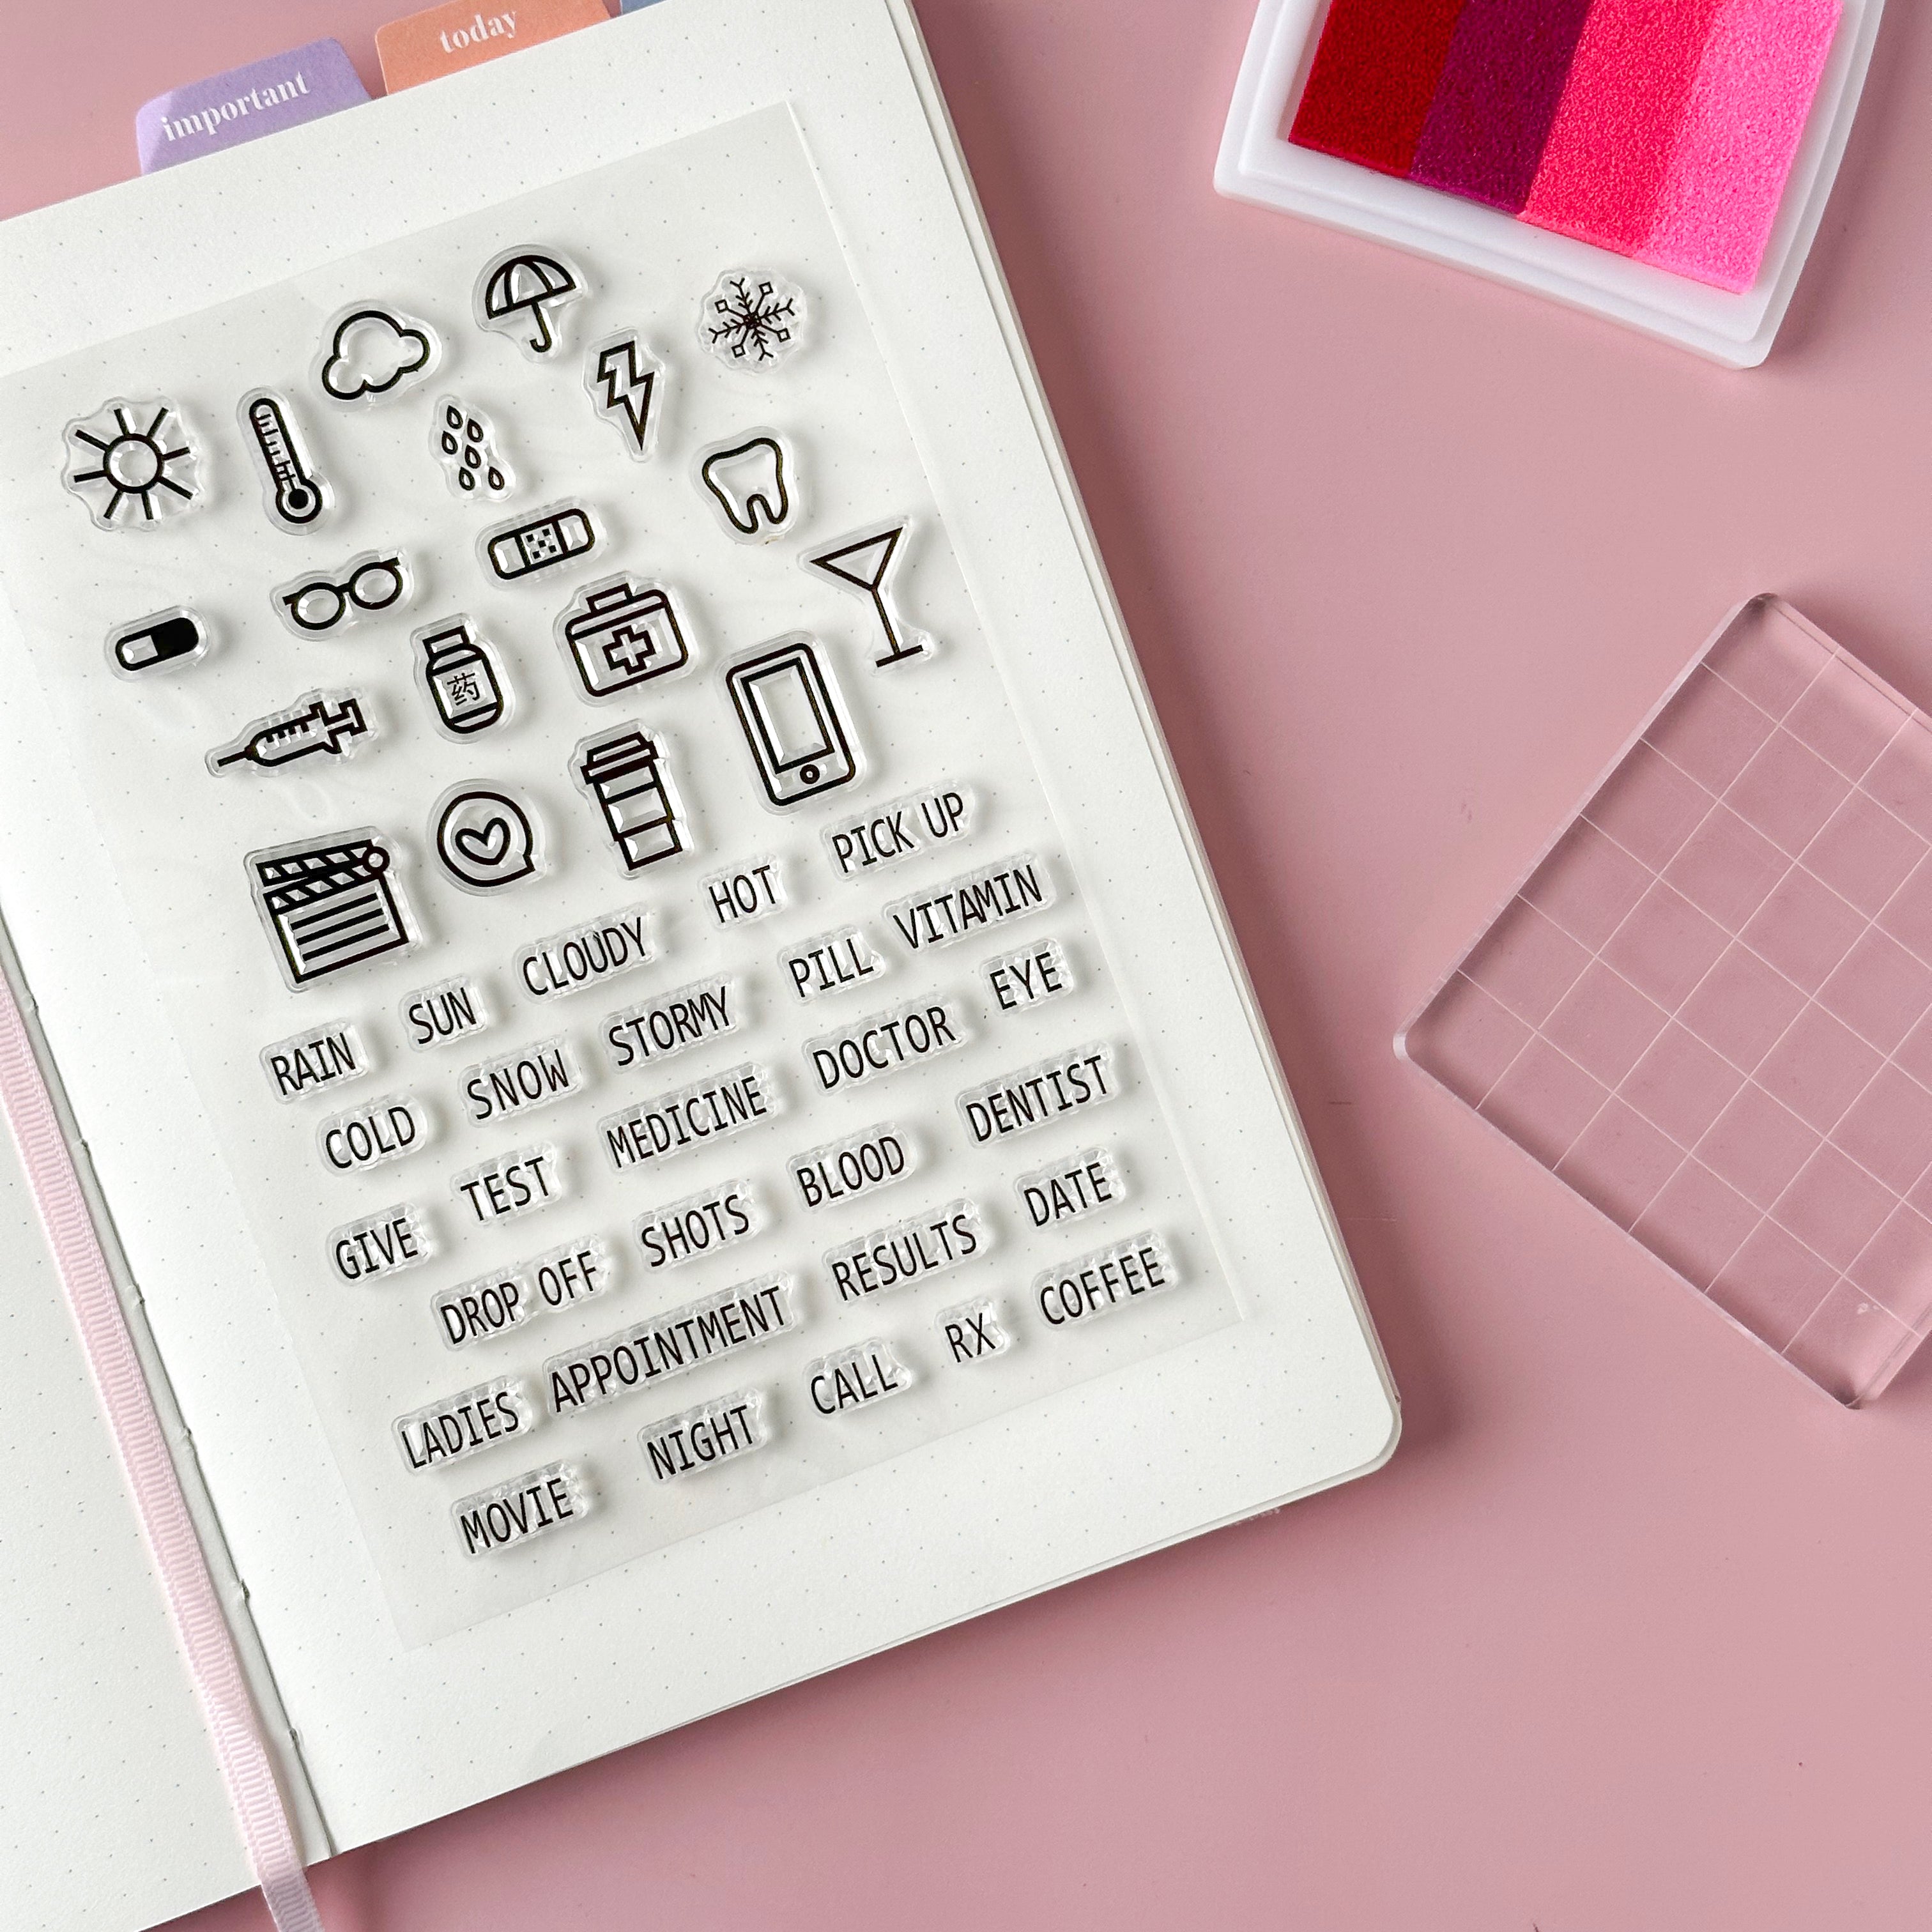 Optimize your planner organization with our specialized icon stamps, offering a variety of medical symbols, weather icons, and mood indicators to assist you in tracking your well-being and daily experiences. These stamps are sold at BBB Supplies Craft Shop.